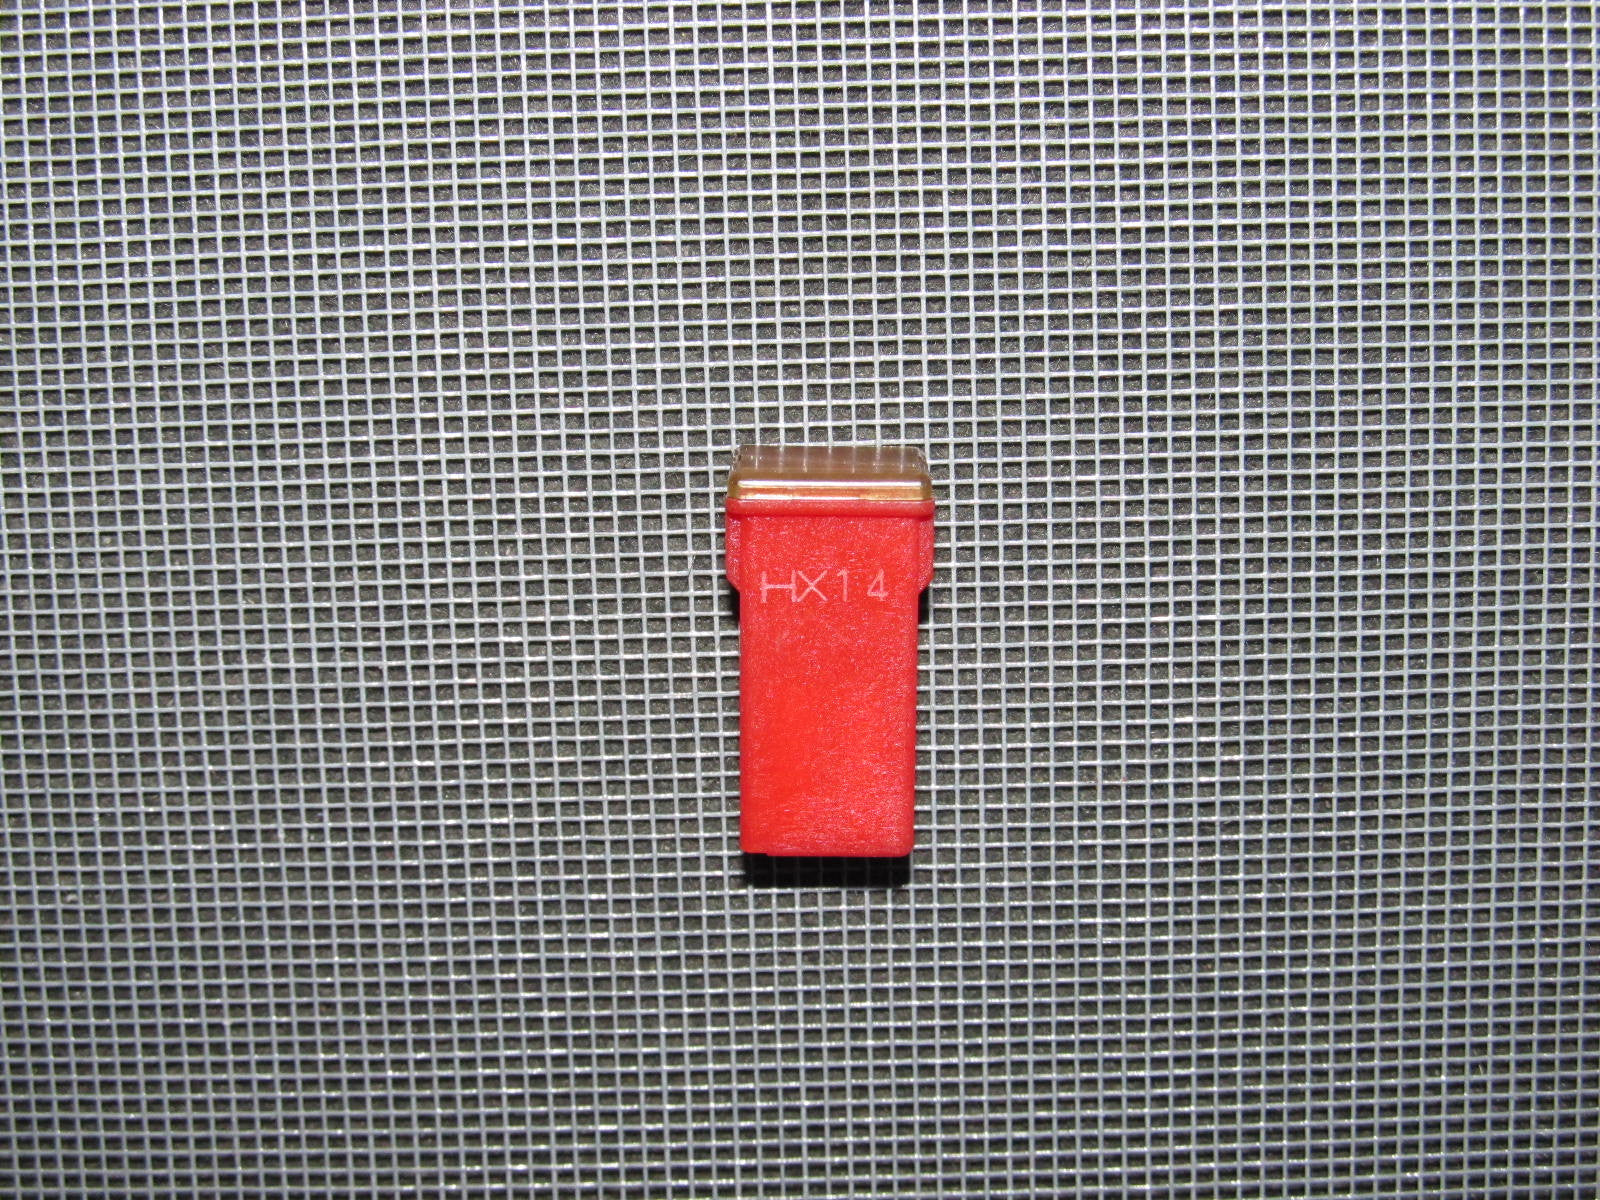 Toyota & Lexus Universal Fuse 50A - Red